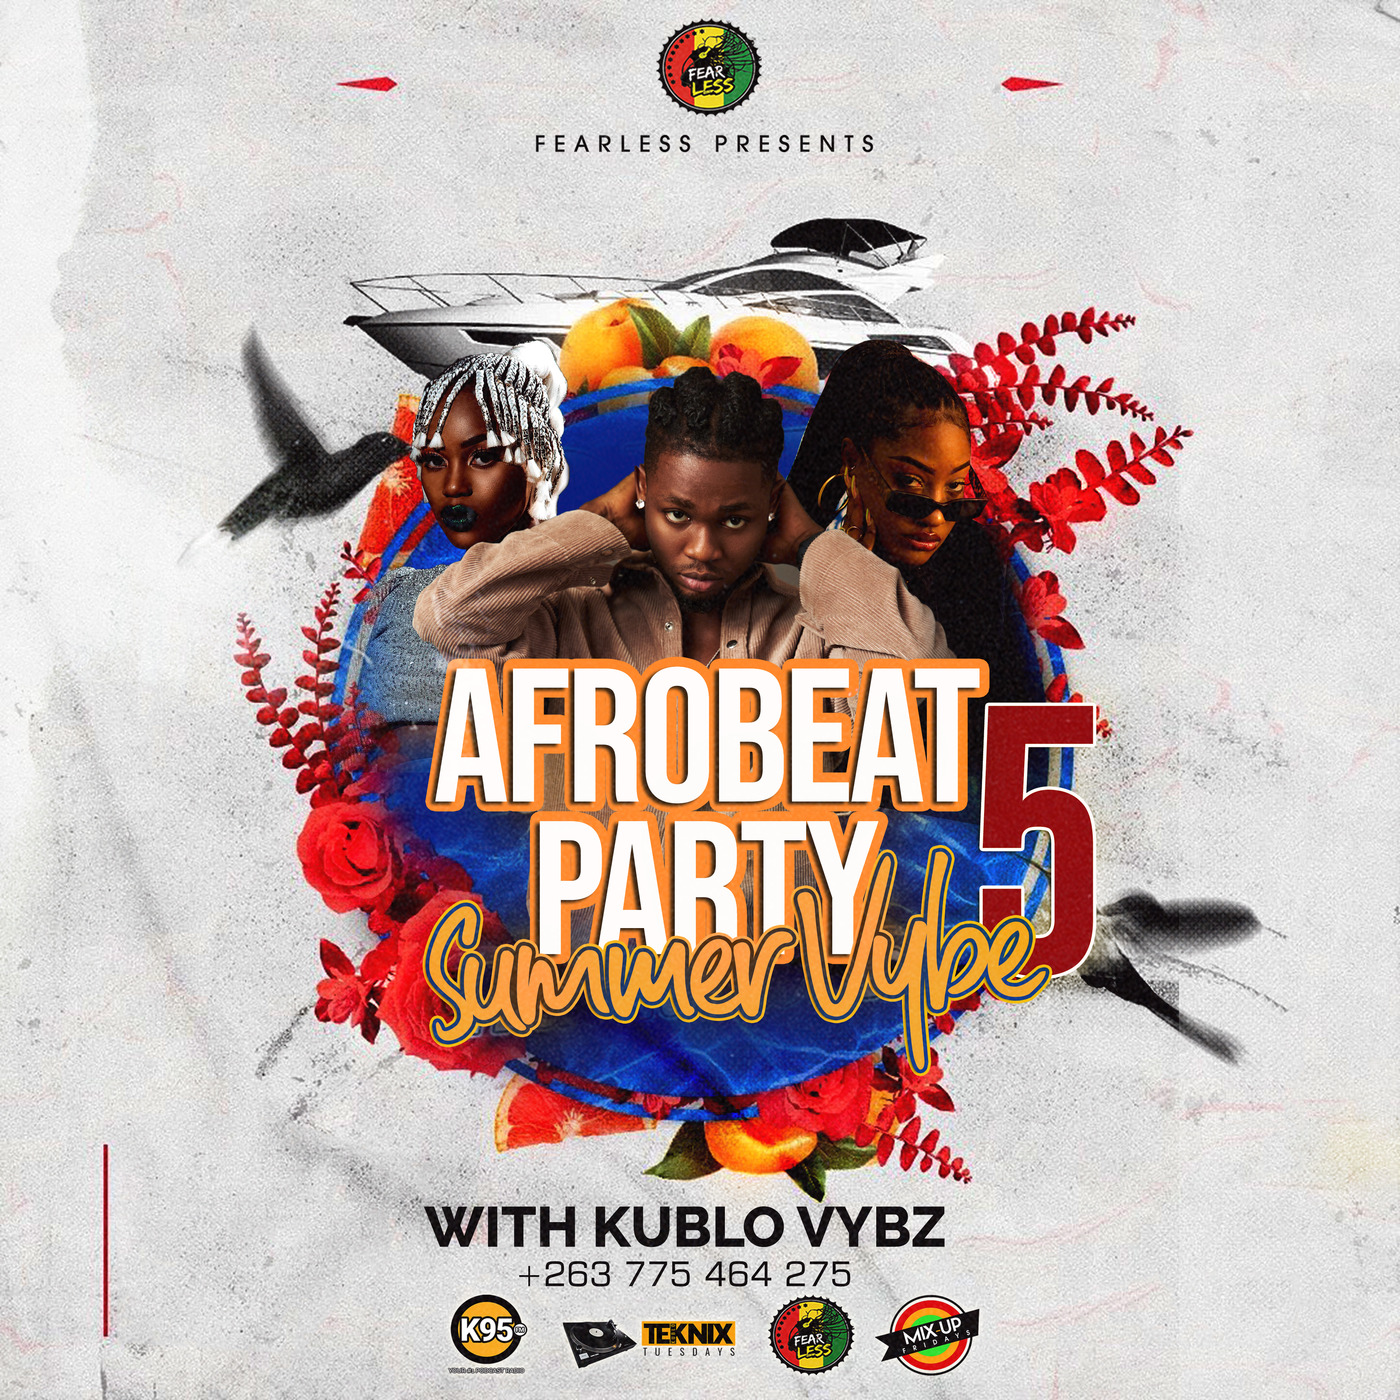 AFROBEAT PARTY 5 SUMMER VYBE